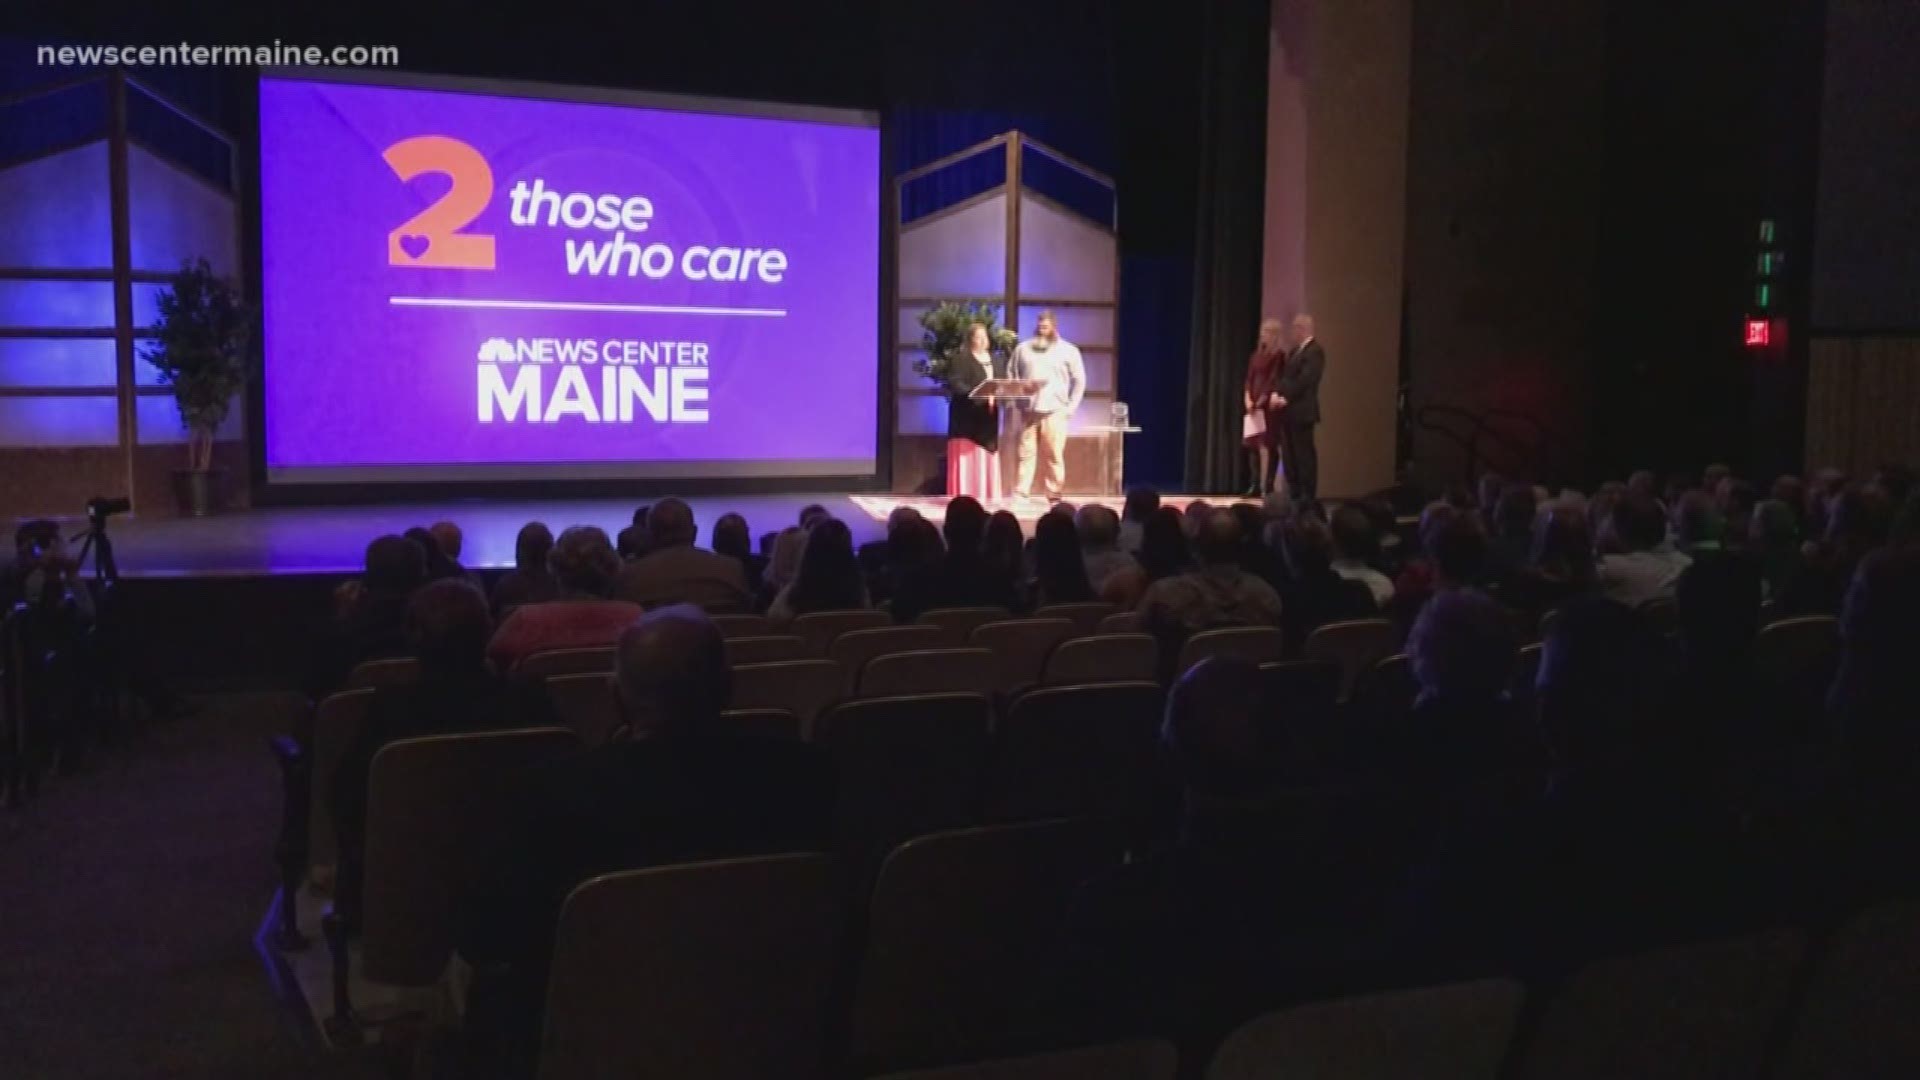 People who serve their community were honored in Bangor Thursday night, October 10 at the annual 2 those Who Care Awards.